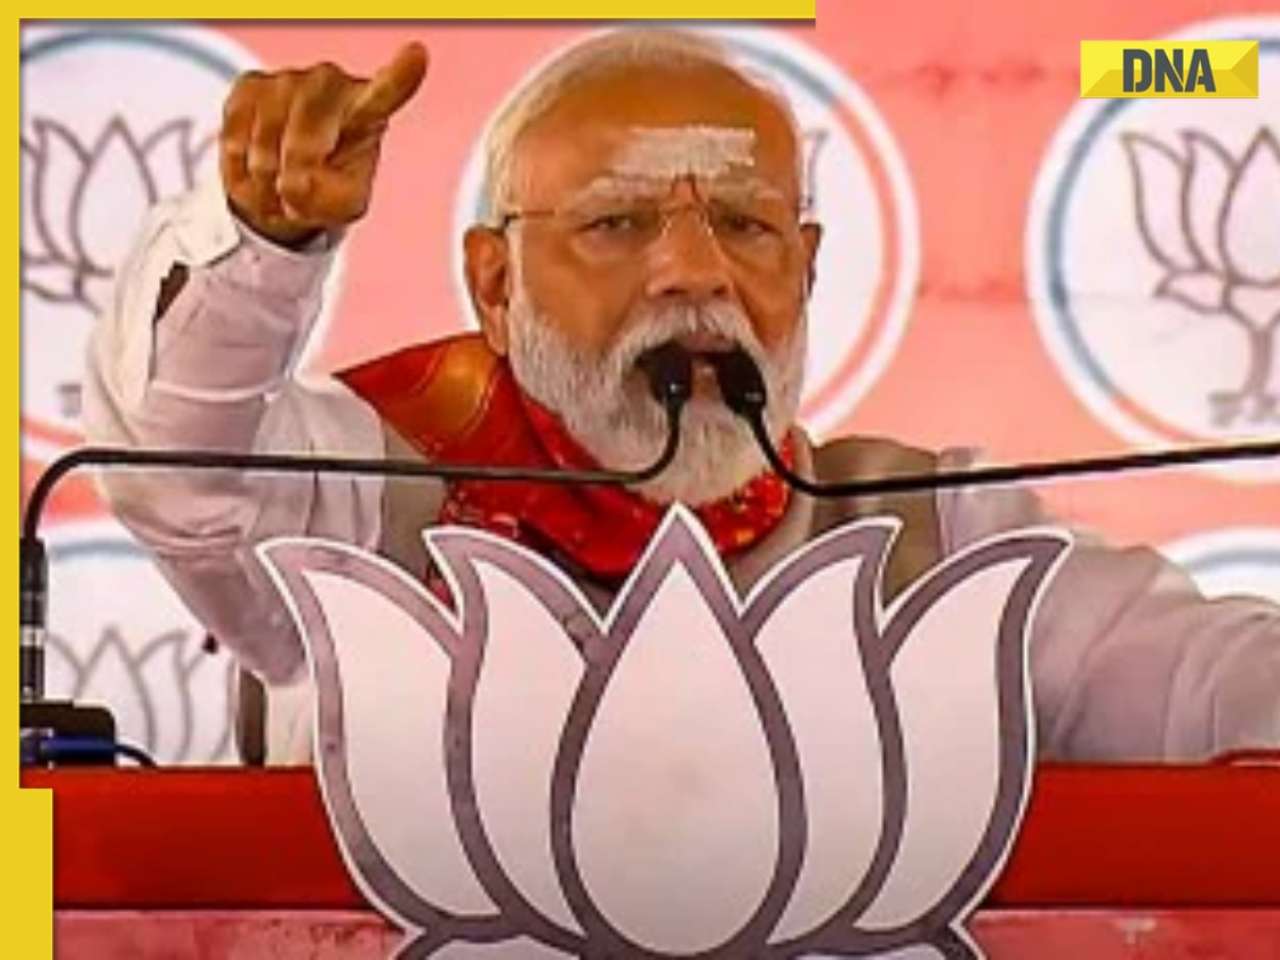 'How much black money have they received?': PM Modi questions Rahul Gandhi's 'sudden silence' on Adani, Ambani